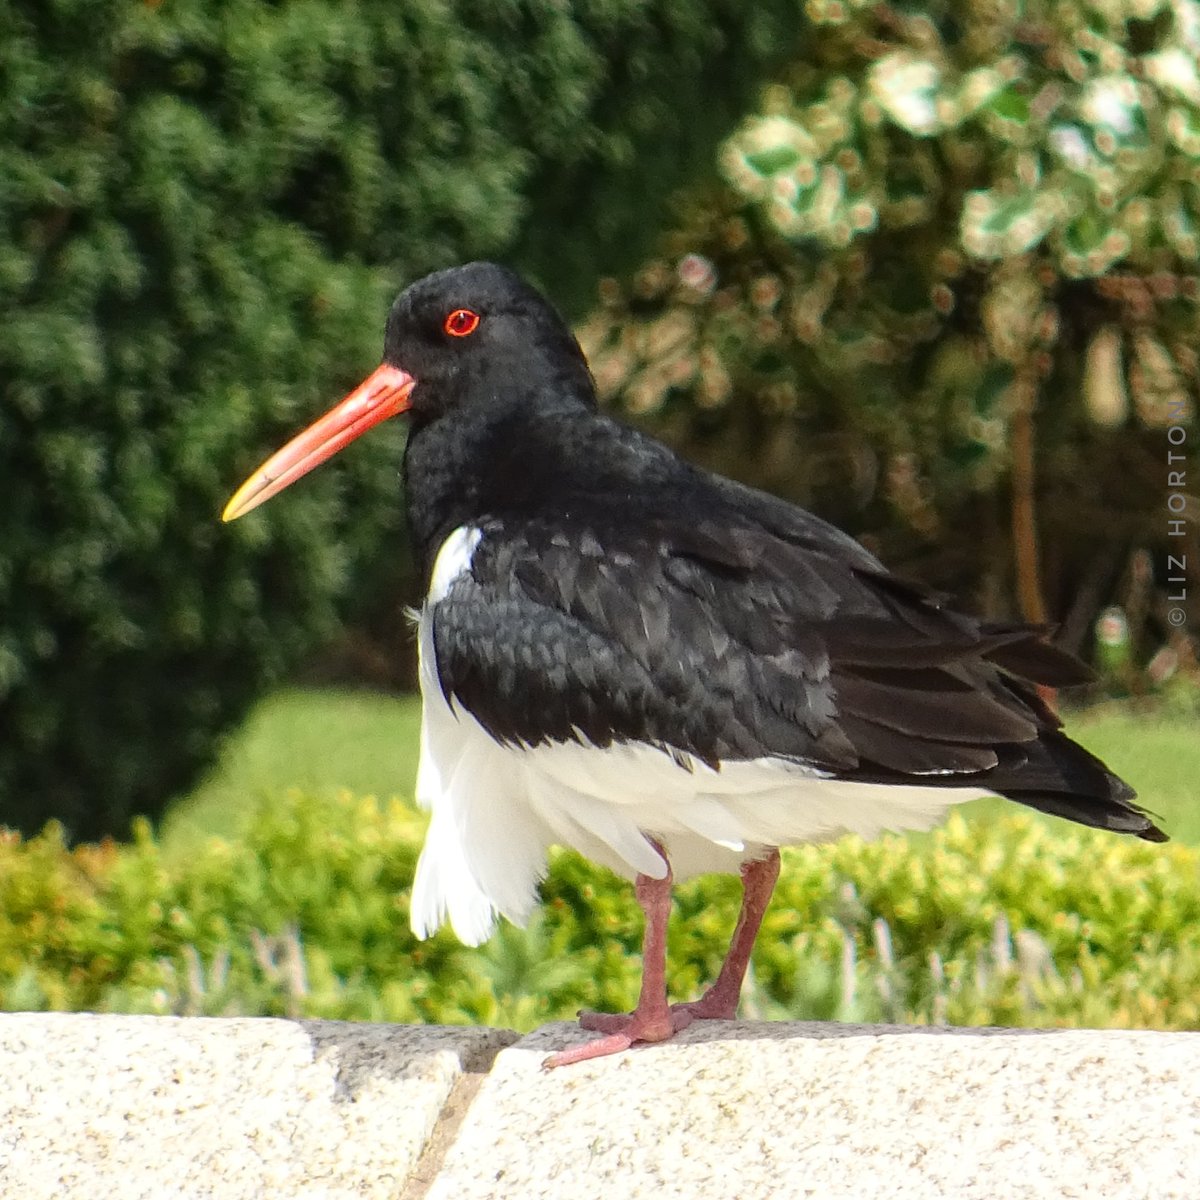 Beautiful #OysterCatcher.. Looking fabulous and shiny after a bathing and preening session.. #nature #wildlife #birds #photography #birdwatching #birdphotography #BirdTwitter #birdtonic .. 🌱🤍🖤🕊